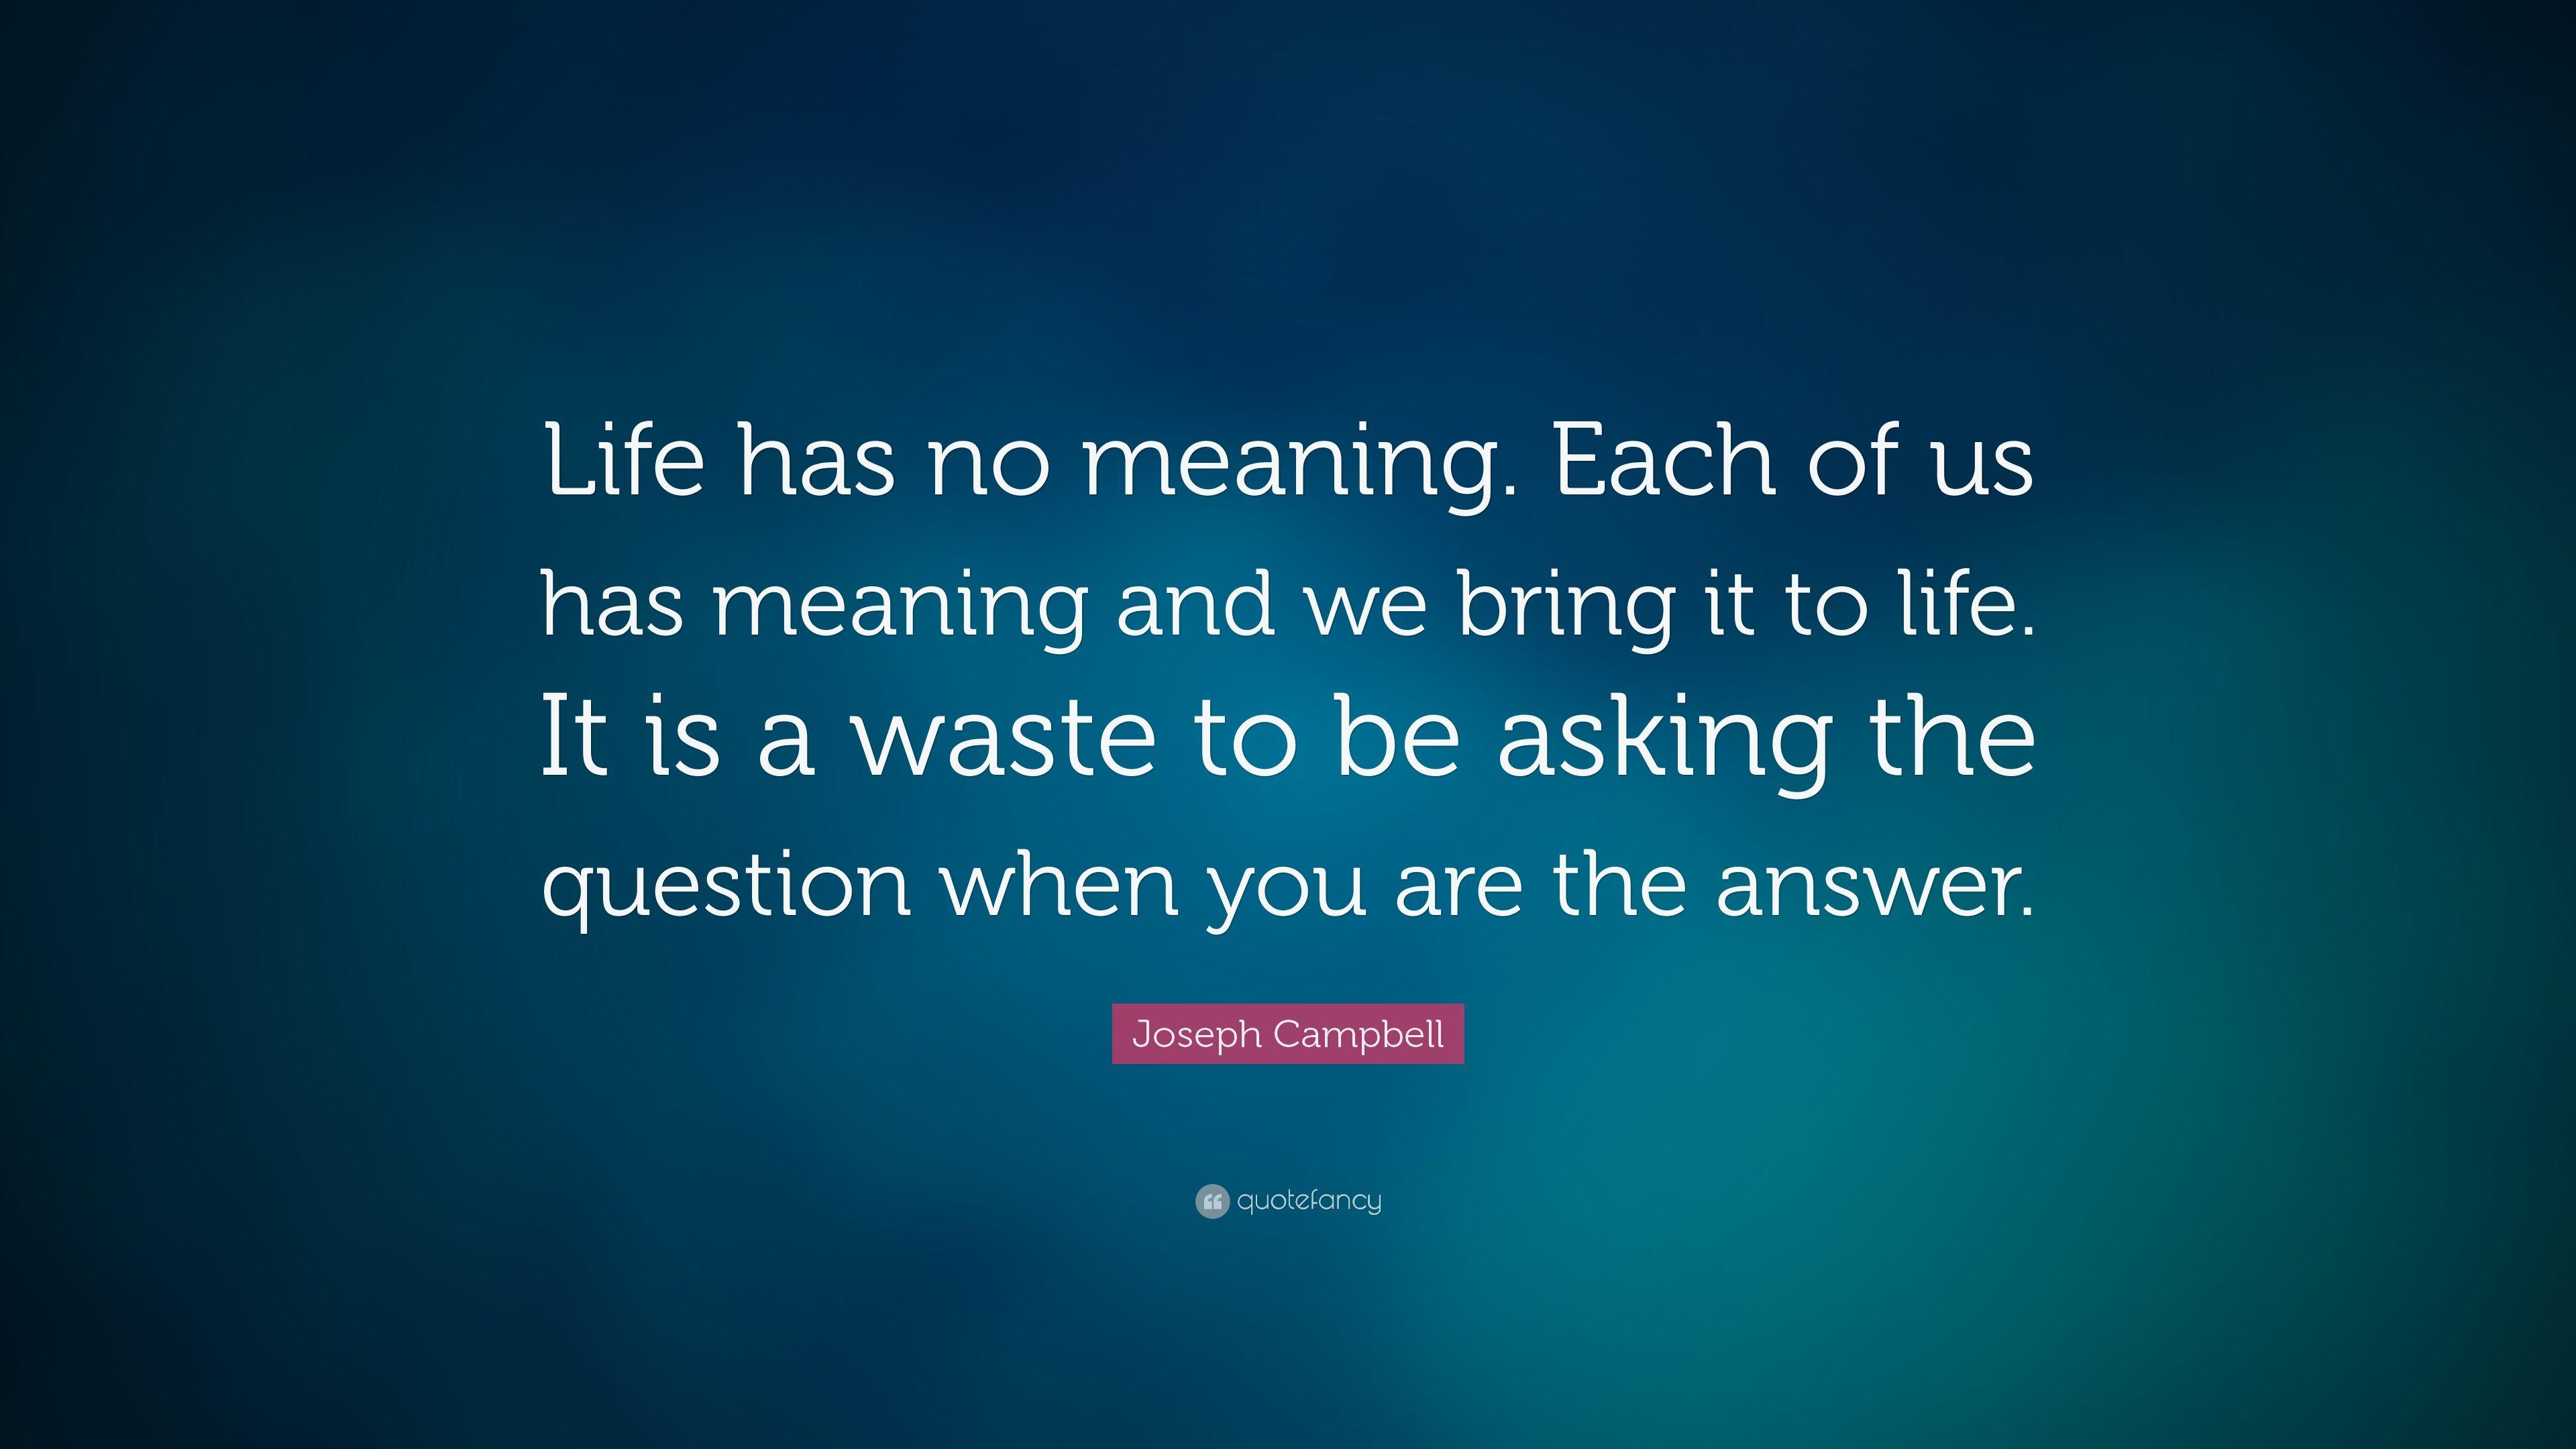 Joseph Campbell Quote: “Life has no meaning. Each of us has